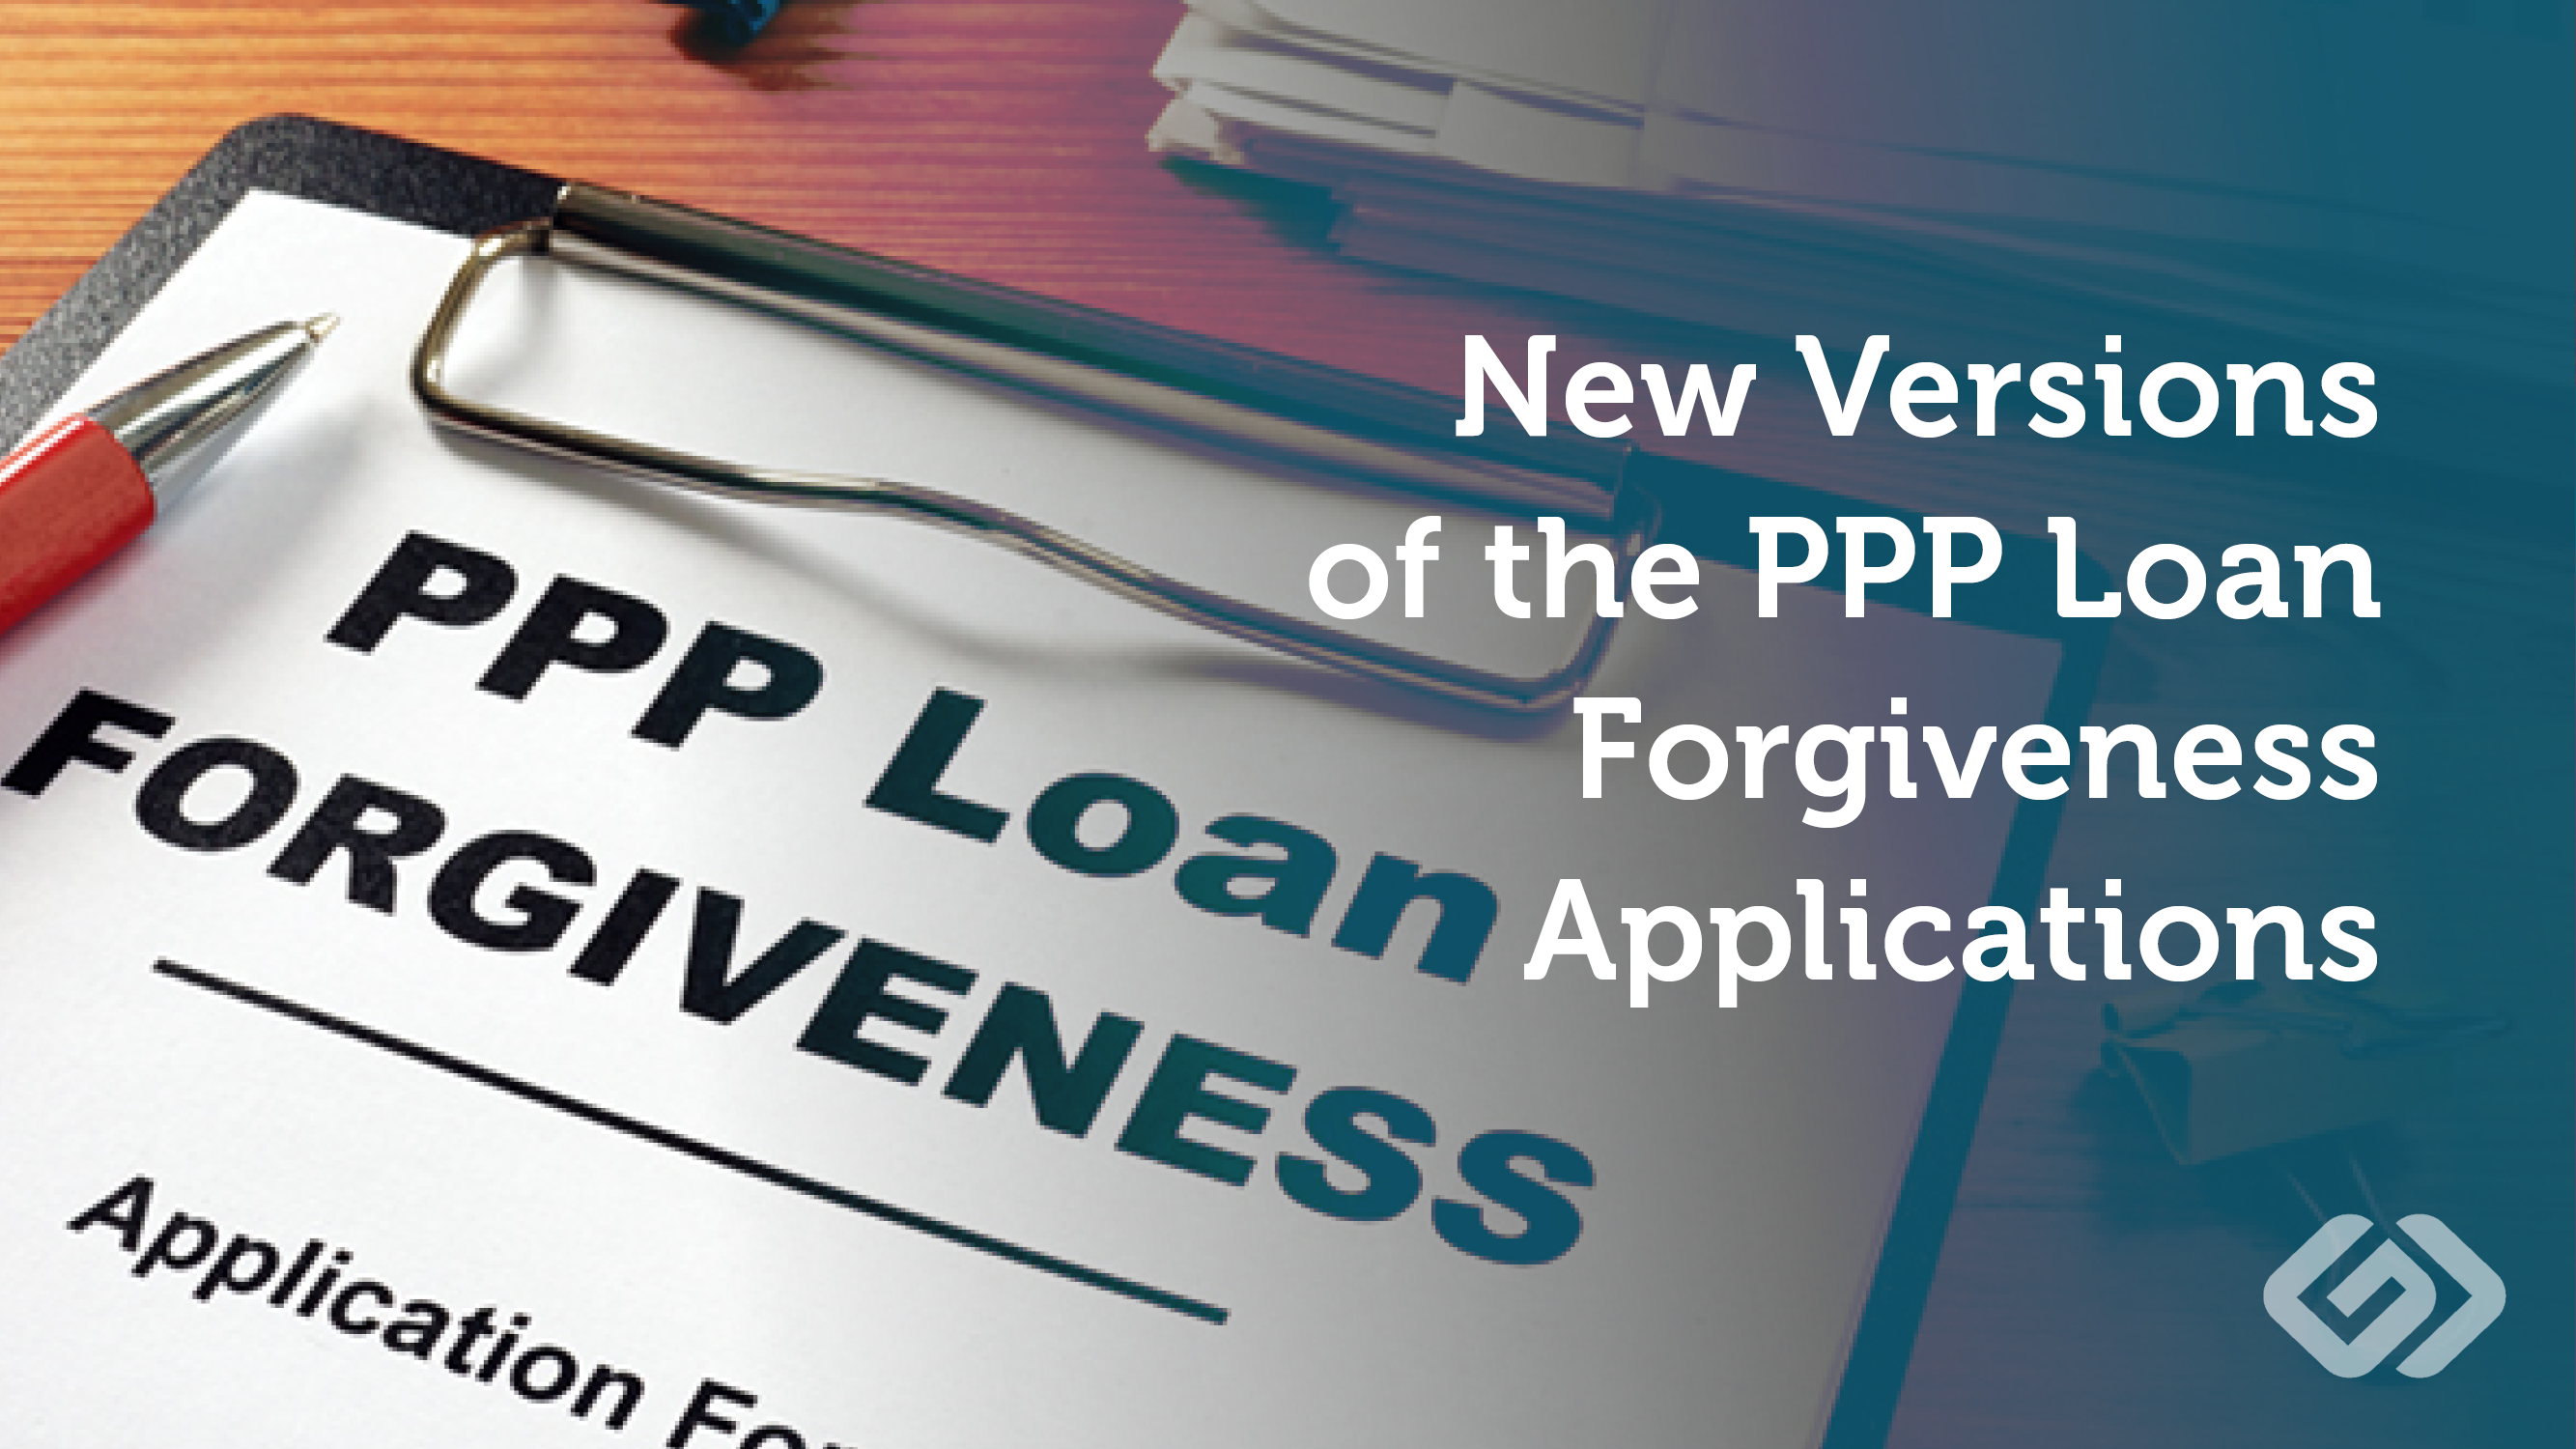 New Versions of the PPP Loan Applications Grimbleby Coleman